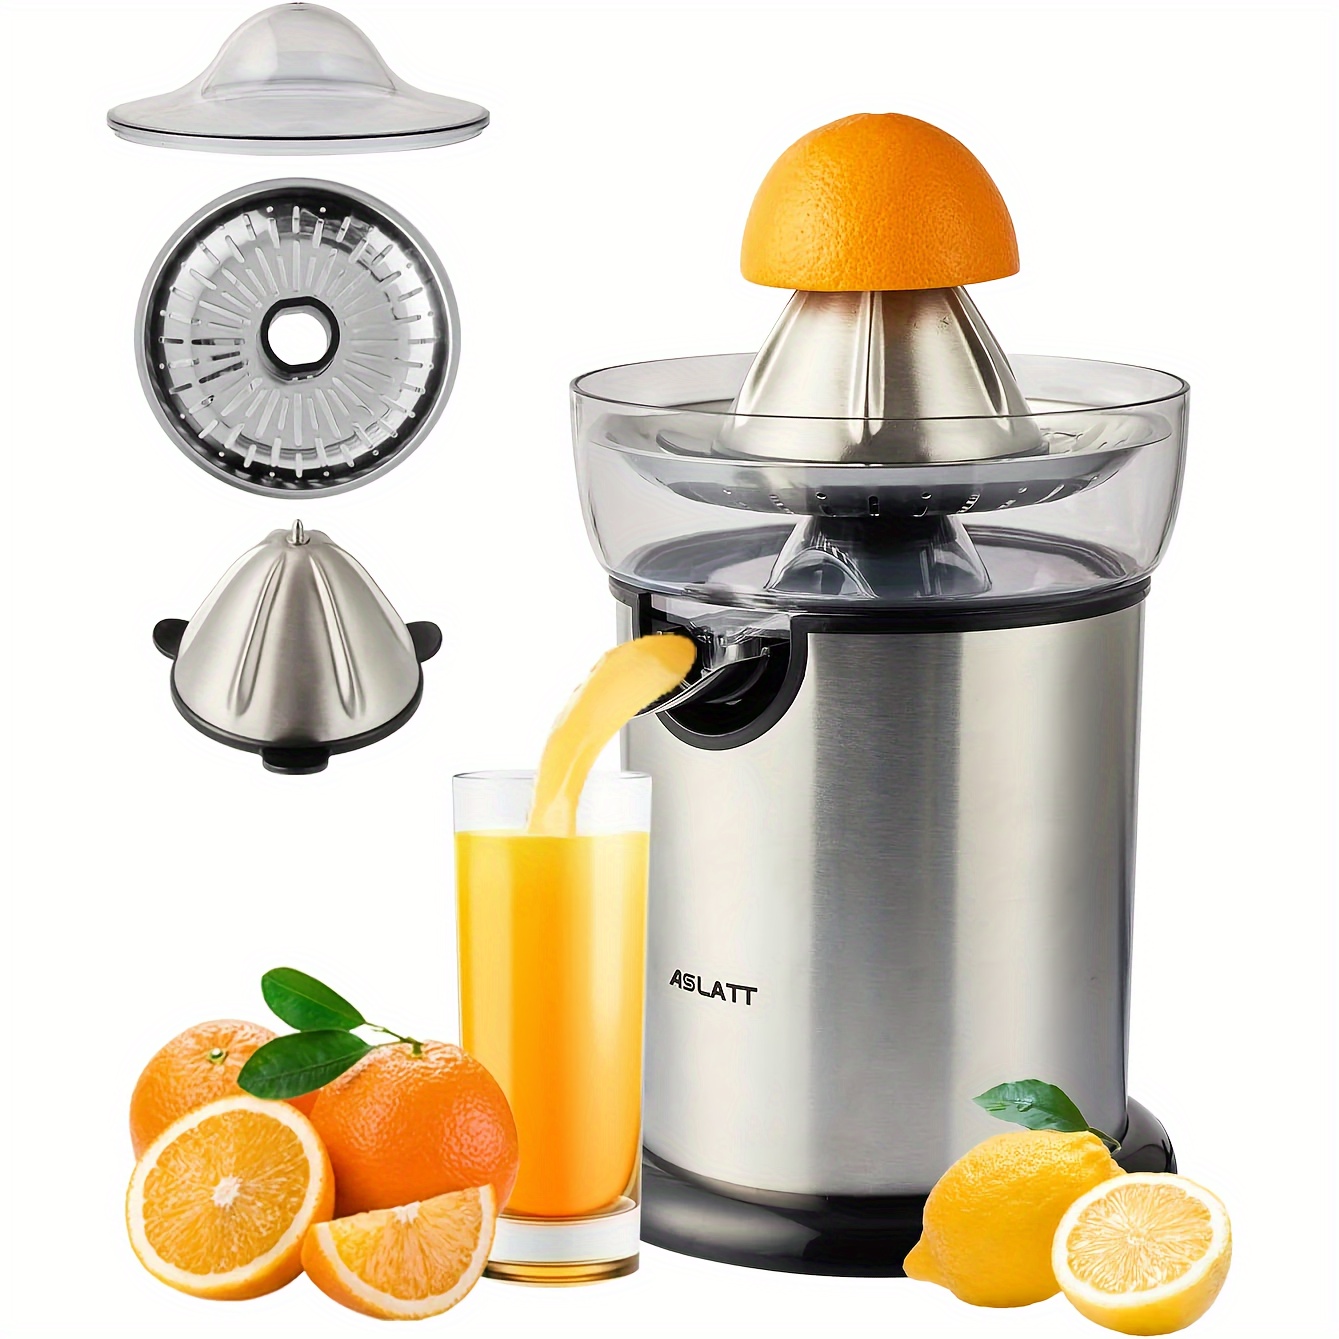 

Electric Citrus Juicer For Oranges And Lemons, For Lime, Grapefruit, And Orange Electric Juicer, Silvery, Stainless Steel, Detachable